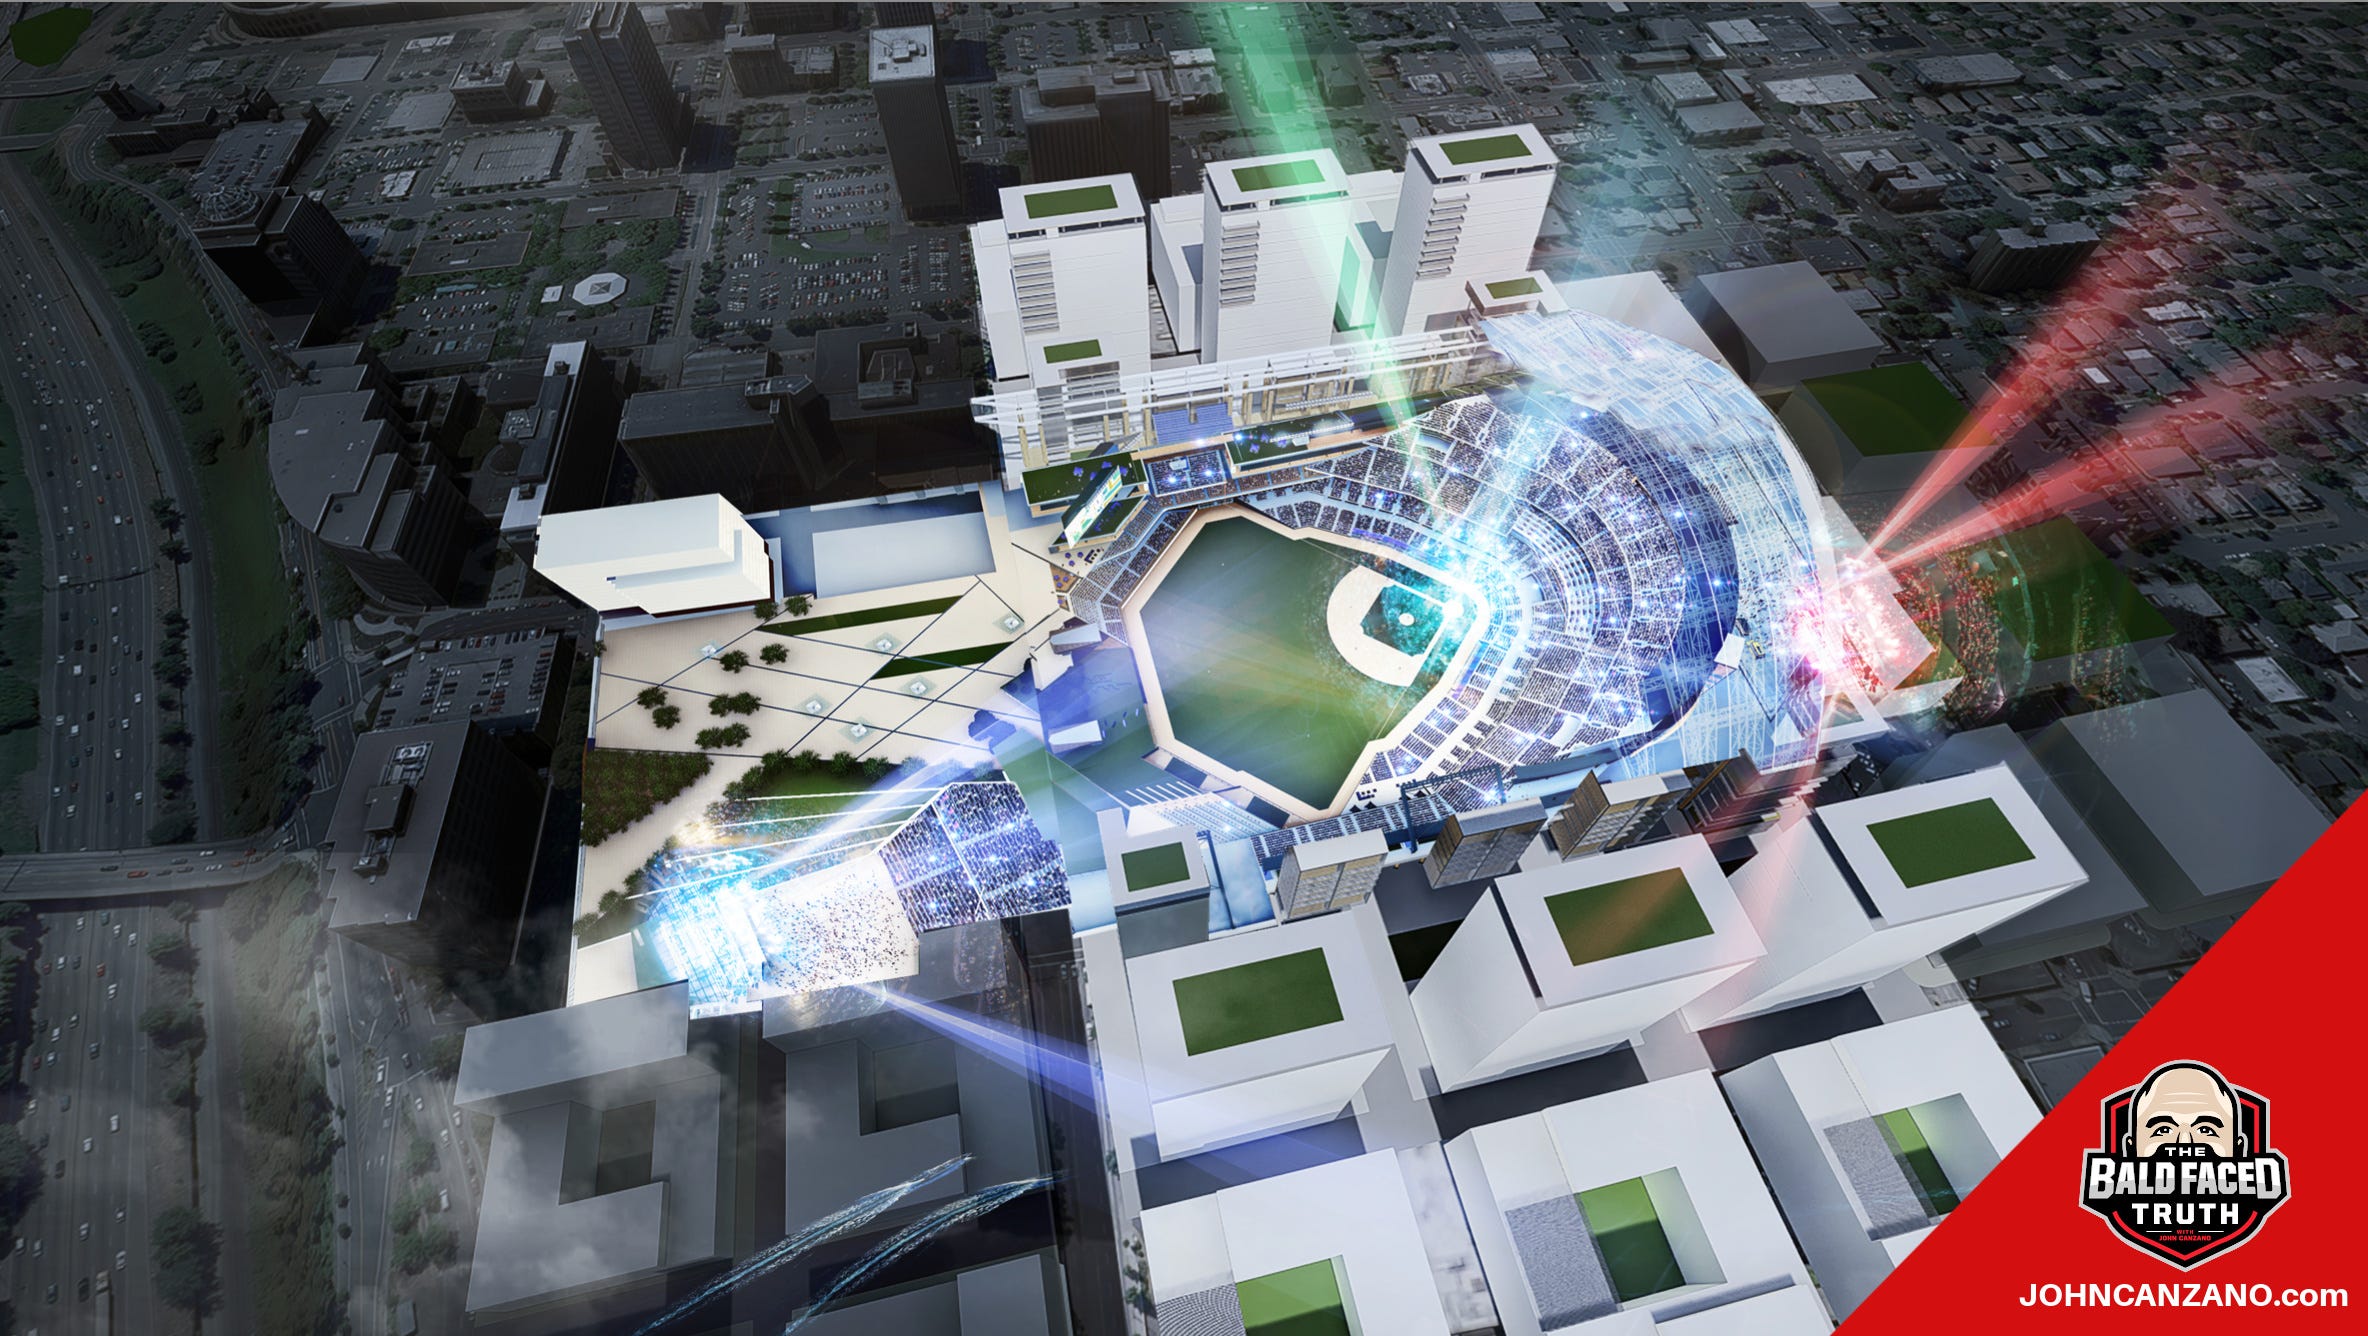 Salt Lake City Looks For An MLB Expansion Team With Stadium Renderings! 